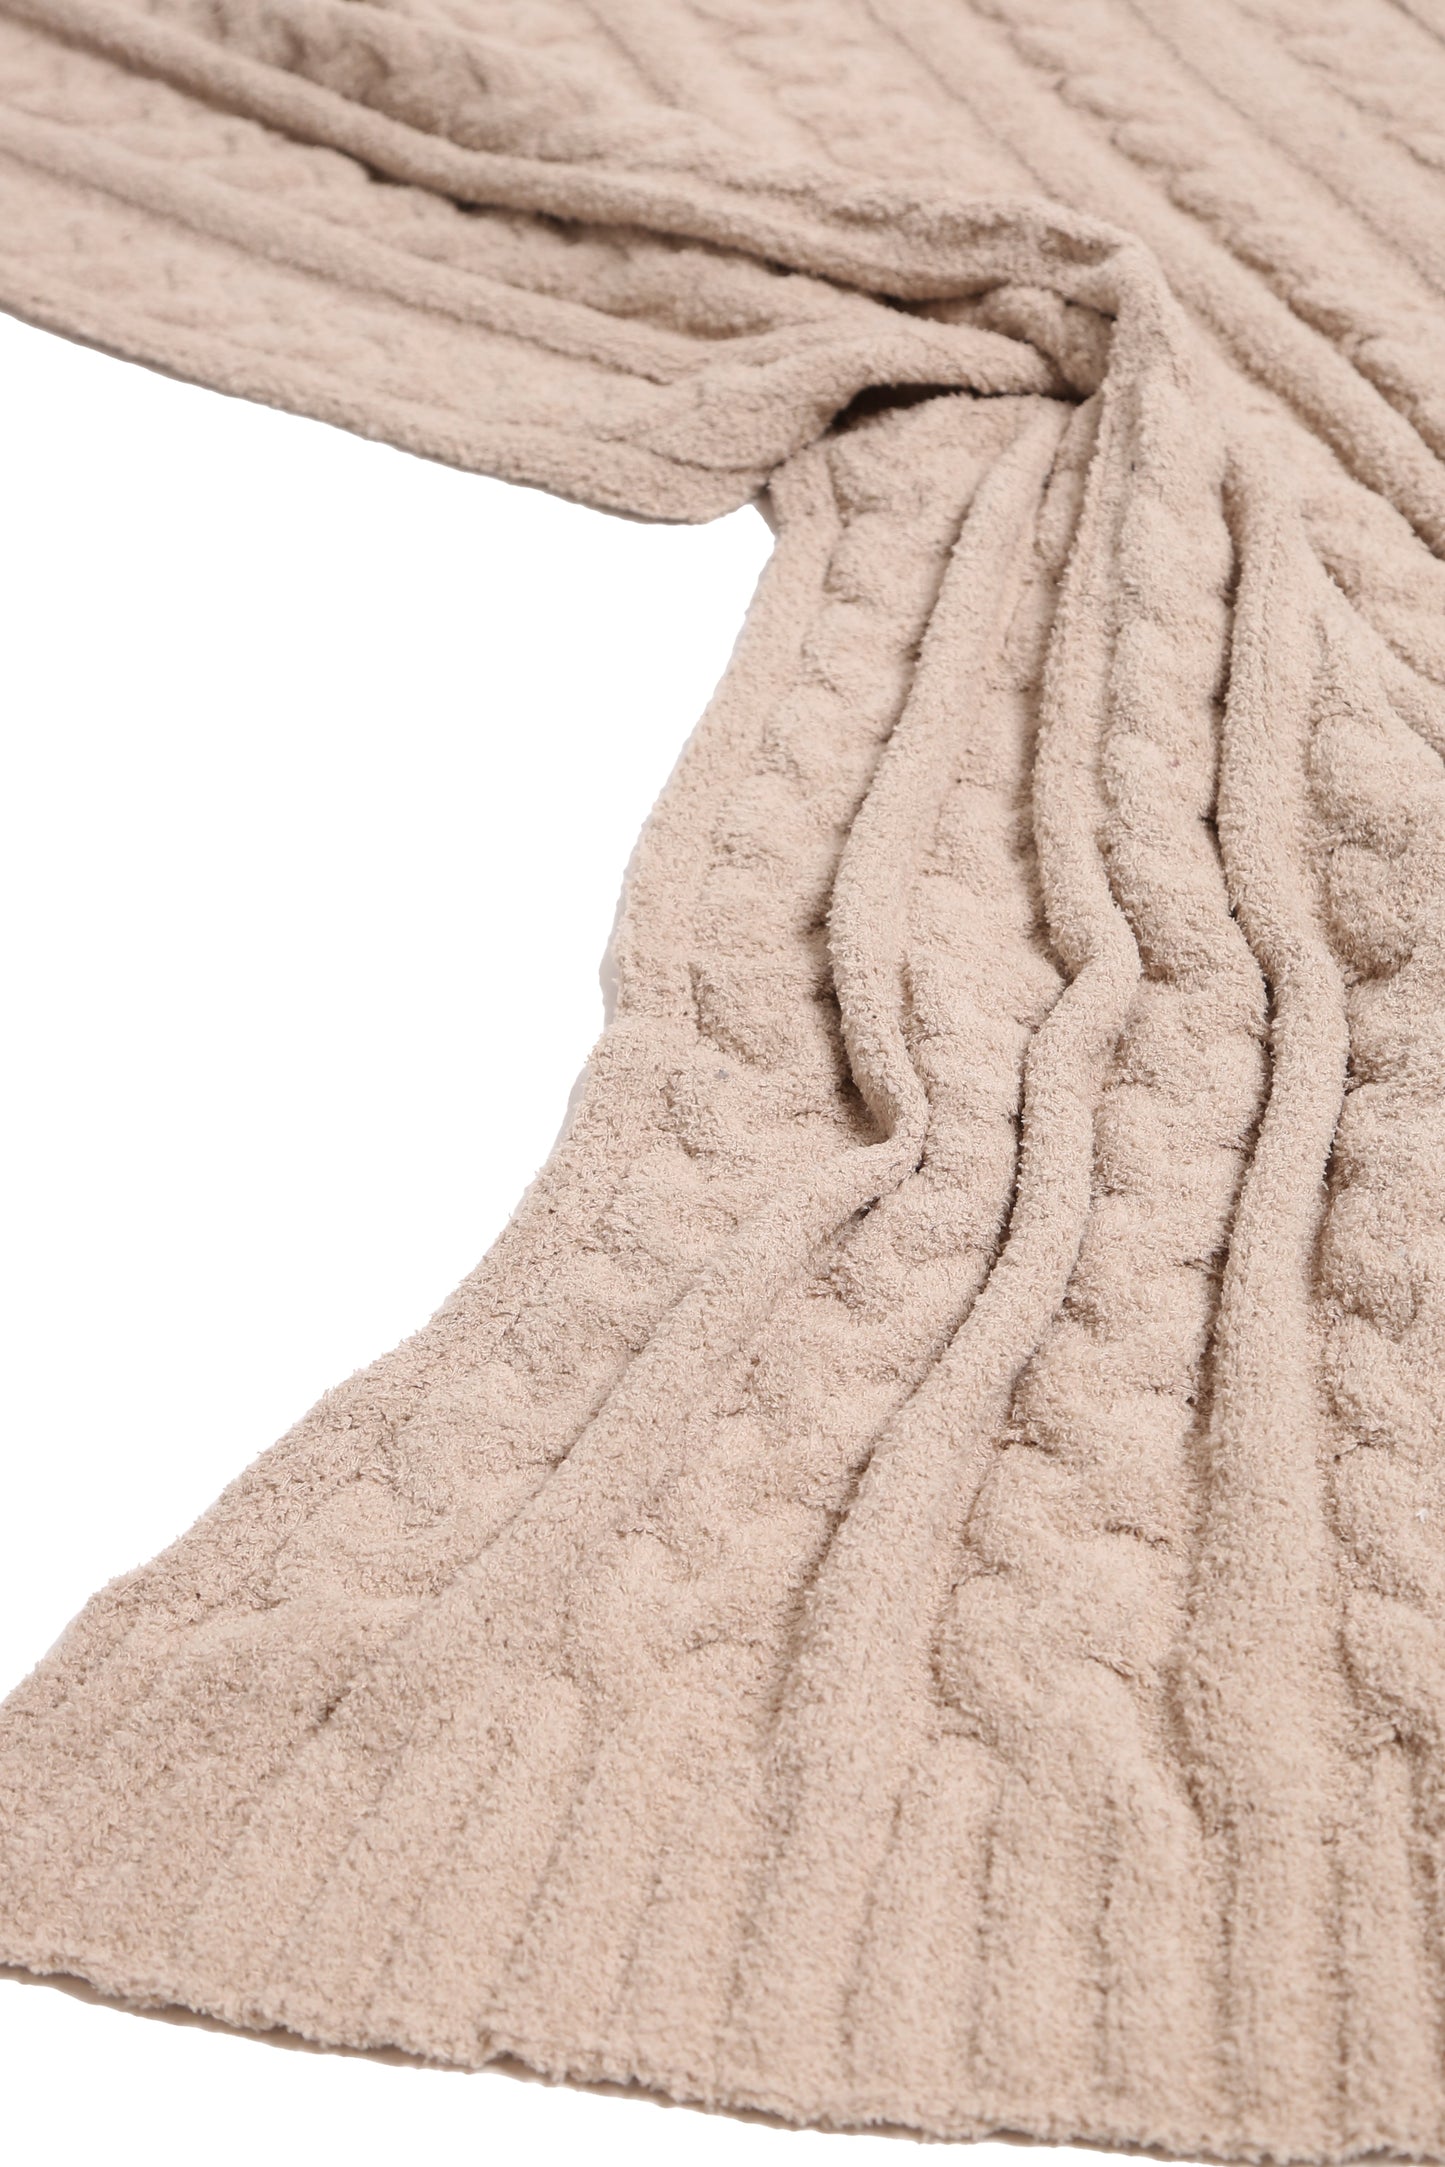 Braided Cable Knit Throw Blanket Gifts Beige